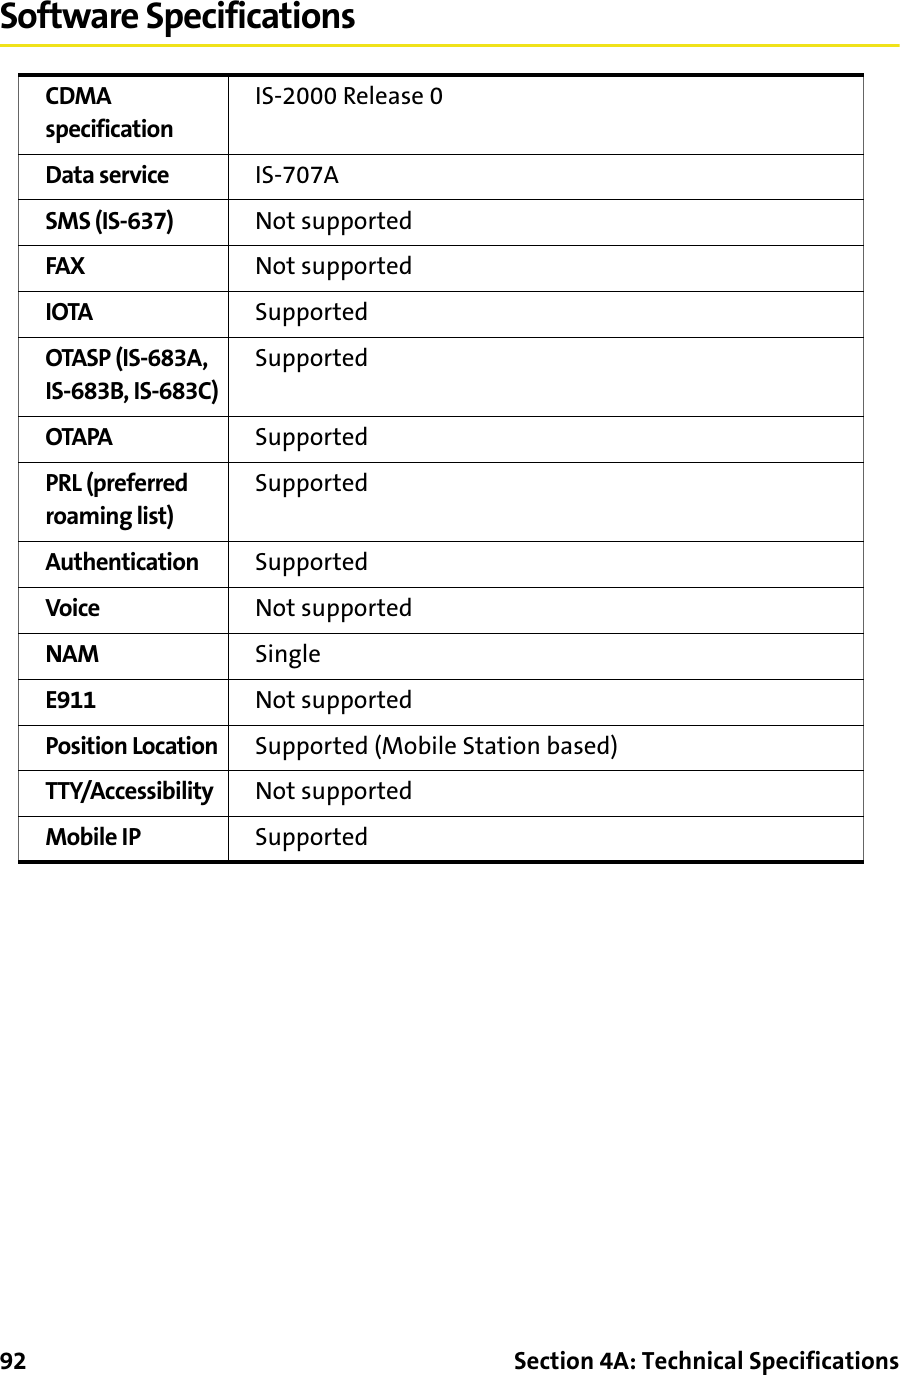 92 Section 4A: Technical SpecificationsSoftware SpecificationsCDMA specificationIS-2000 Release 0Data service IS-707ASMS (IS-637) Not supportedFAX Not supportedIOTA SupportedOTASP (IS-683A, IS-683B, IS-683C)SupportedOTAPA SupportedPRL (preferred roaming list)SupportedAuthentication SupportedVoice Not supportedNAM SingleE911 Not supportedPosition Location Supported (Mobile Station based)TTY/Accessibility Not supportedMobile IP Supported